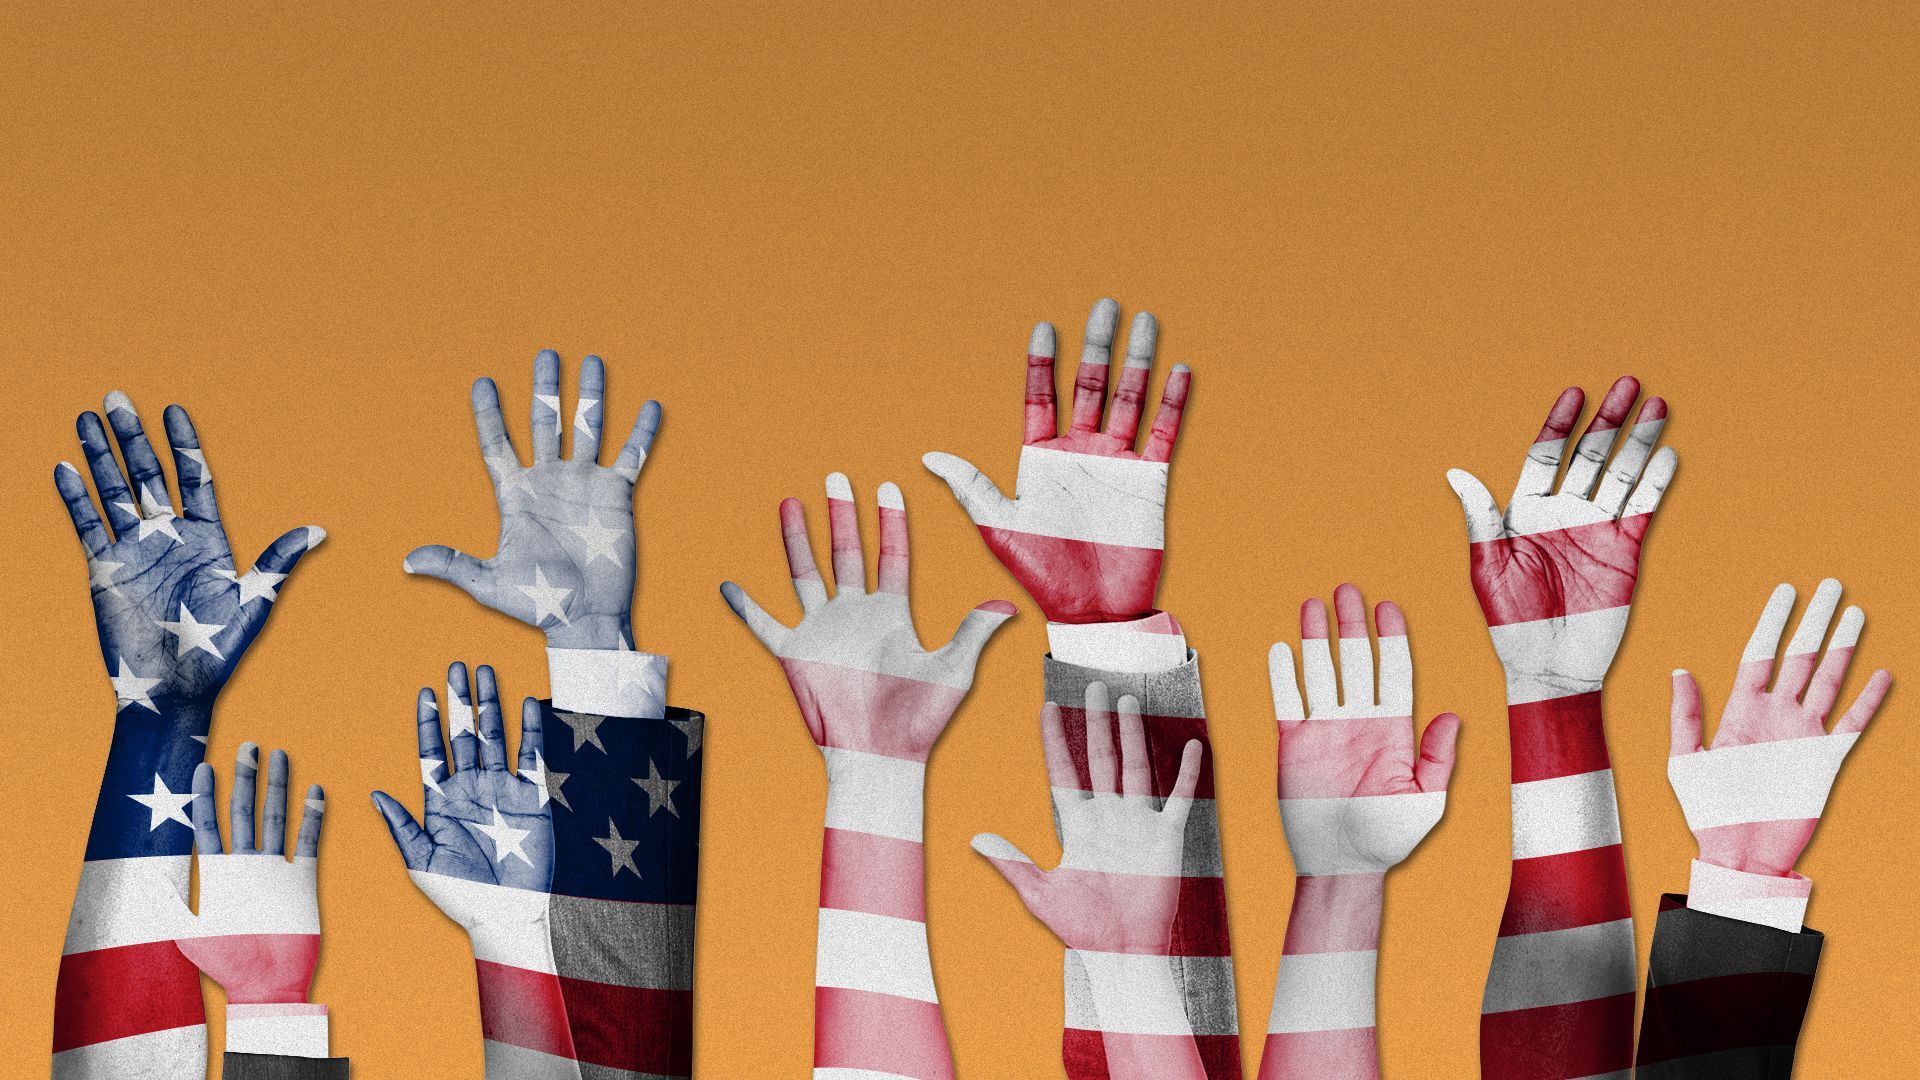 Illustration of a pattern of the U.S. flag on a group of raised hands.